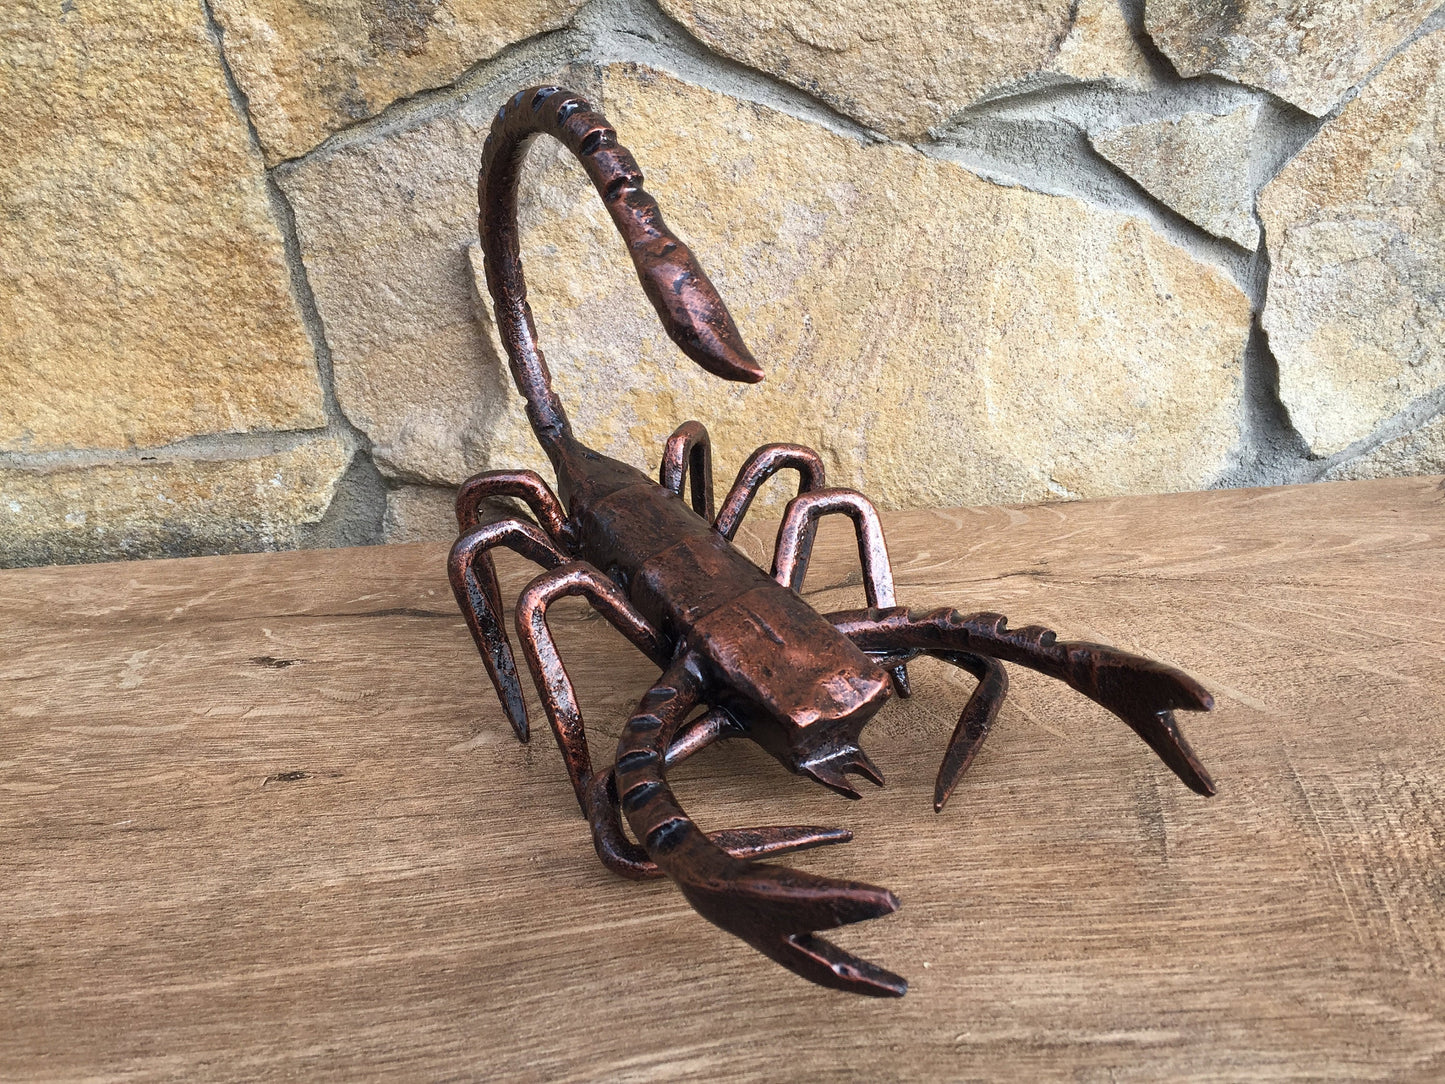 Metal scorpion, forged scorpion, scorpion figurine, arachnid sculpture, metal sculpture, metal statue, art object, metal insect, spider